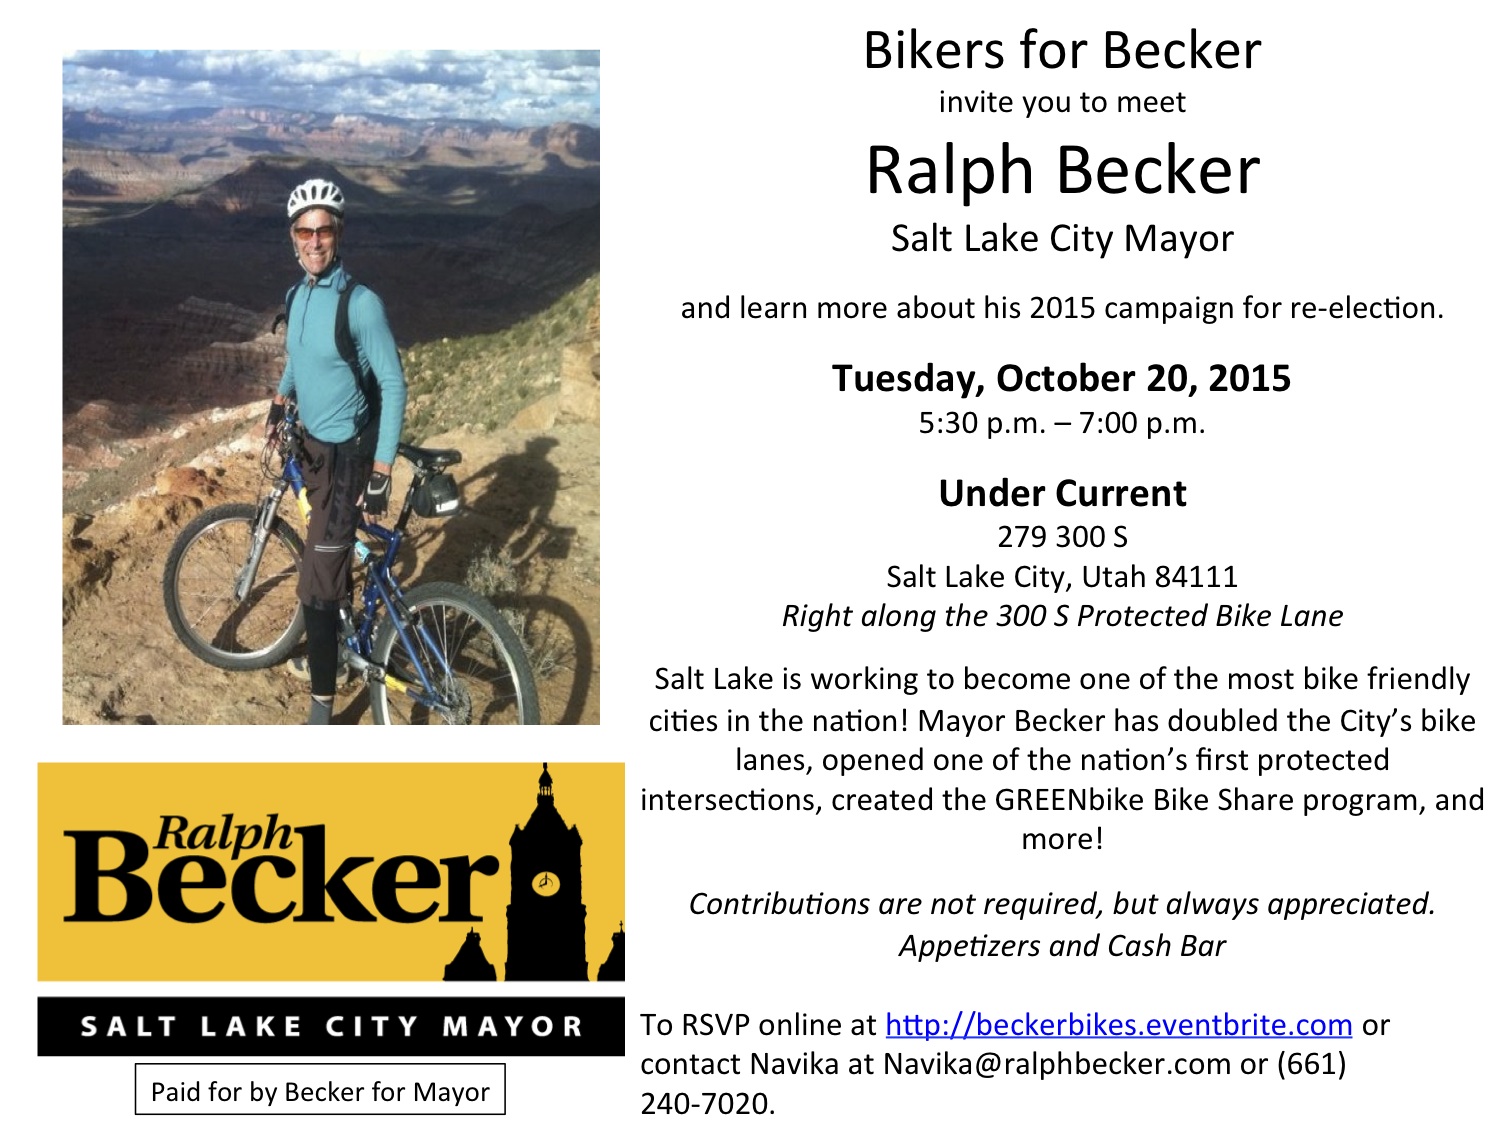 Becker Campaign to Hold Fundraiser Aimed at Cyclists